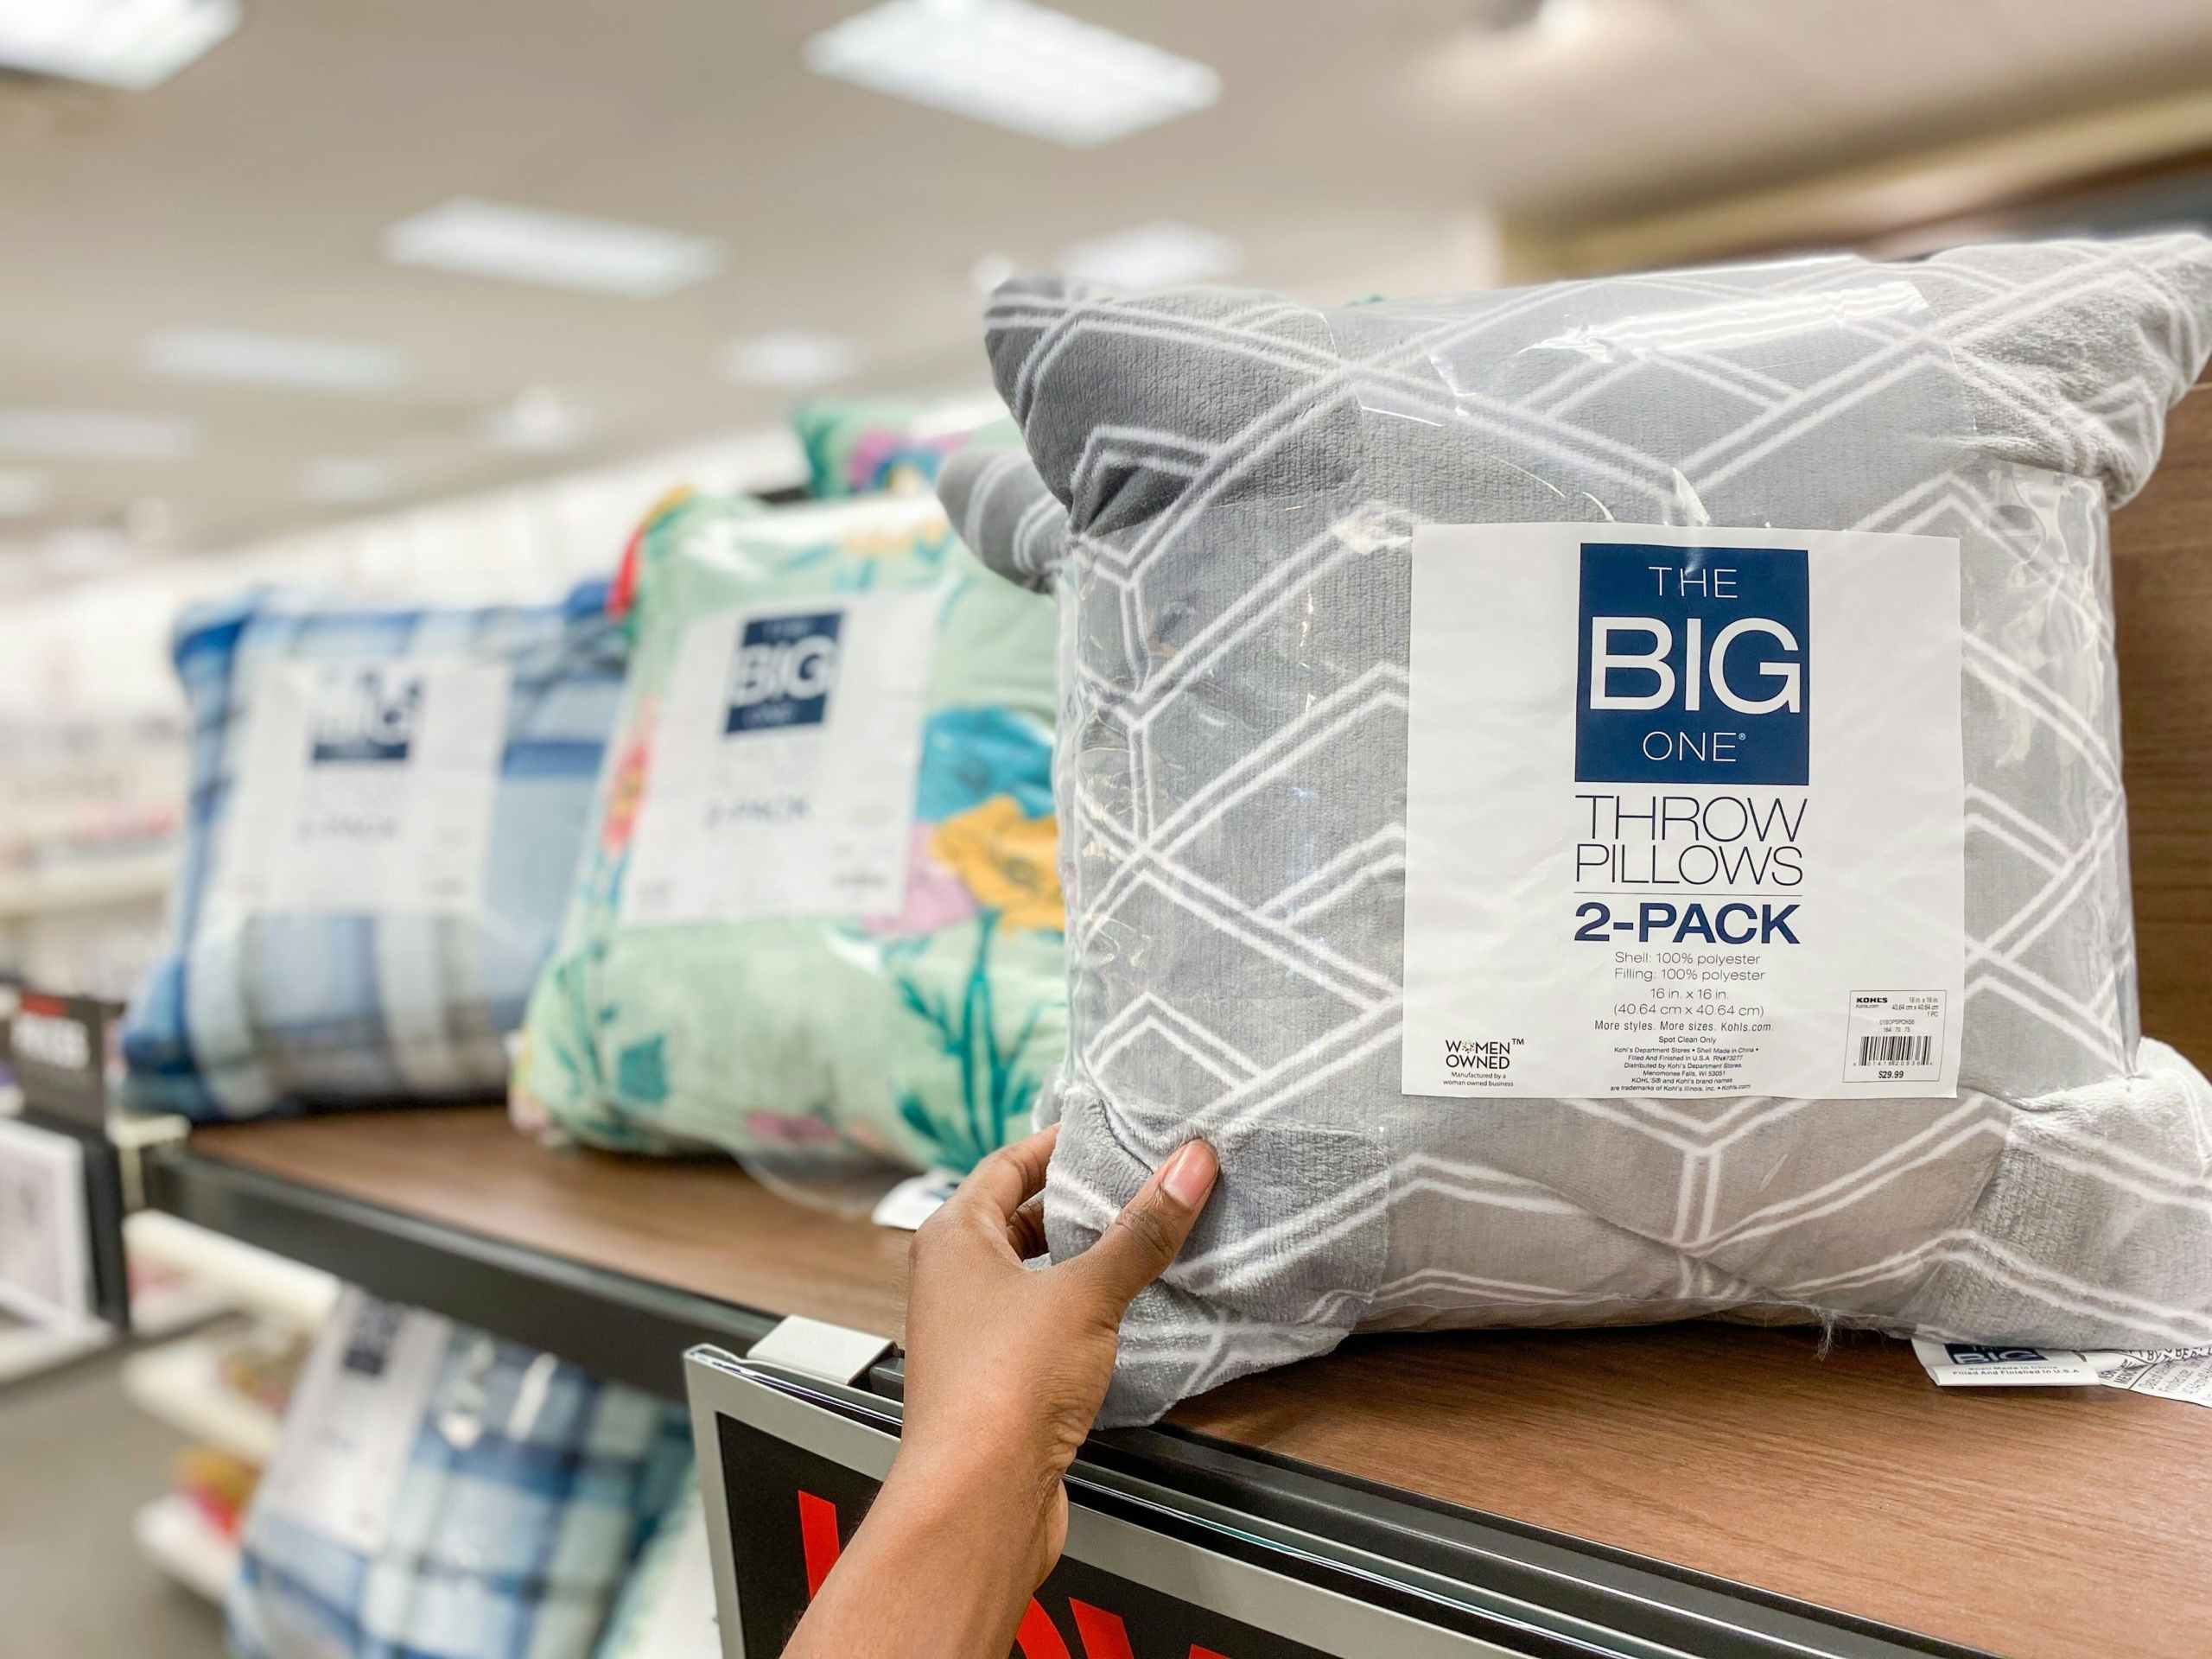 the big one pillows on shelf